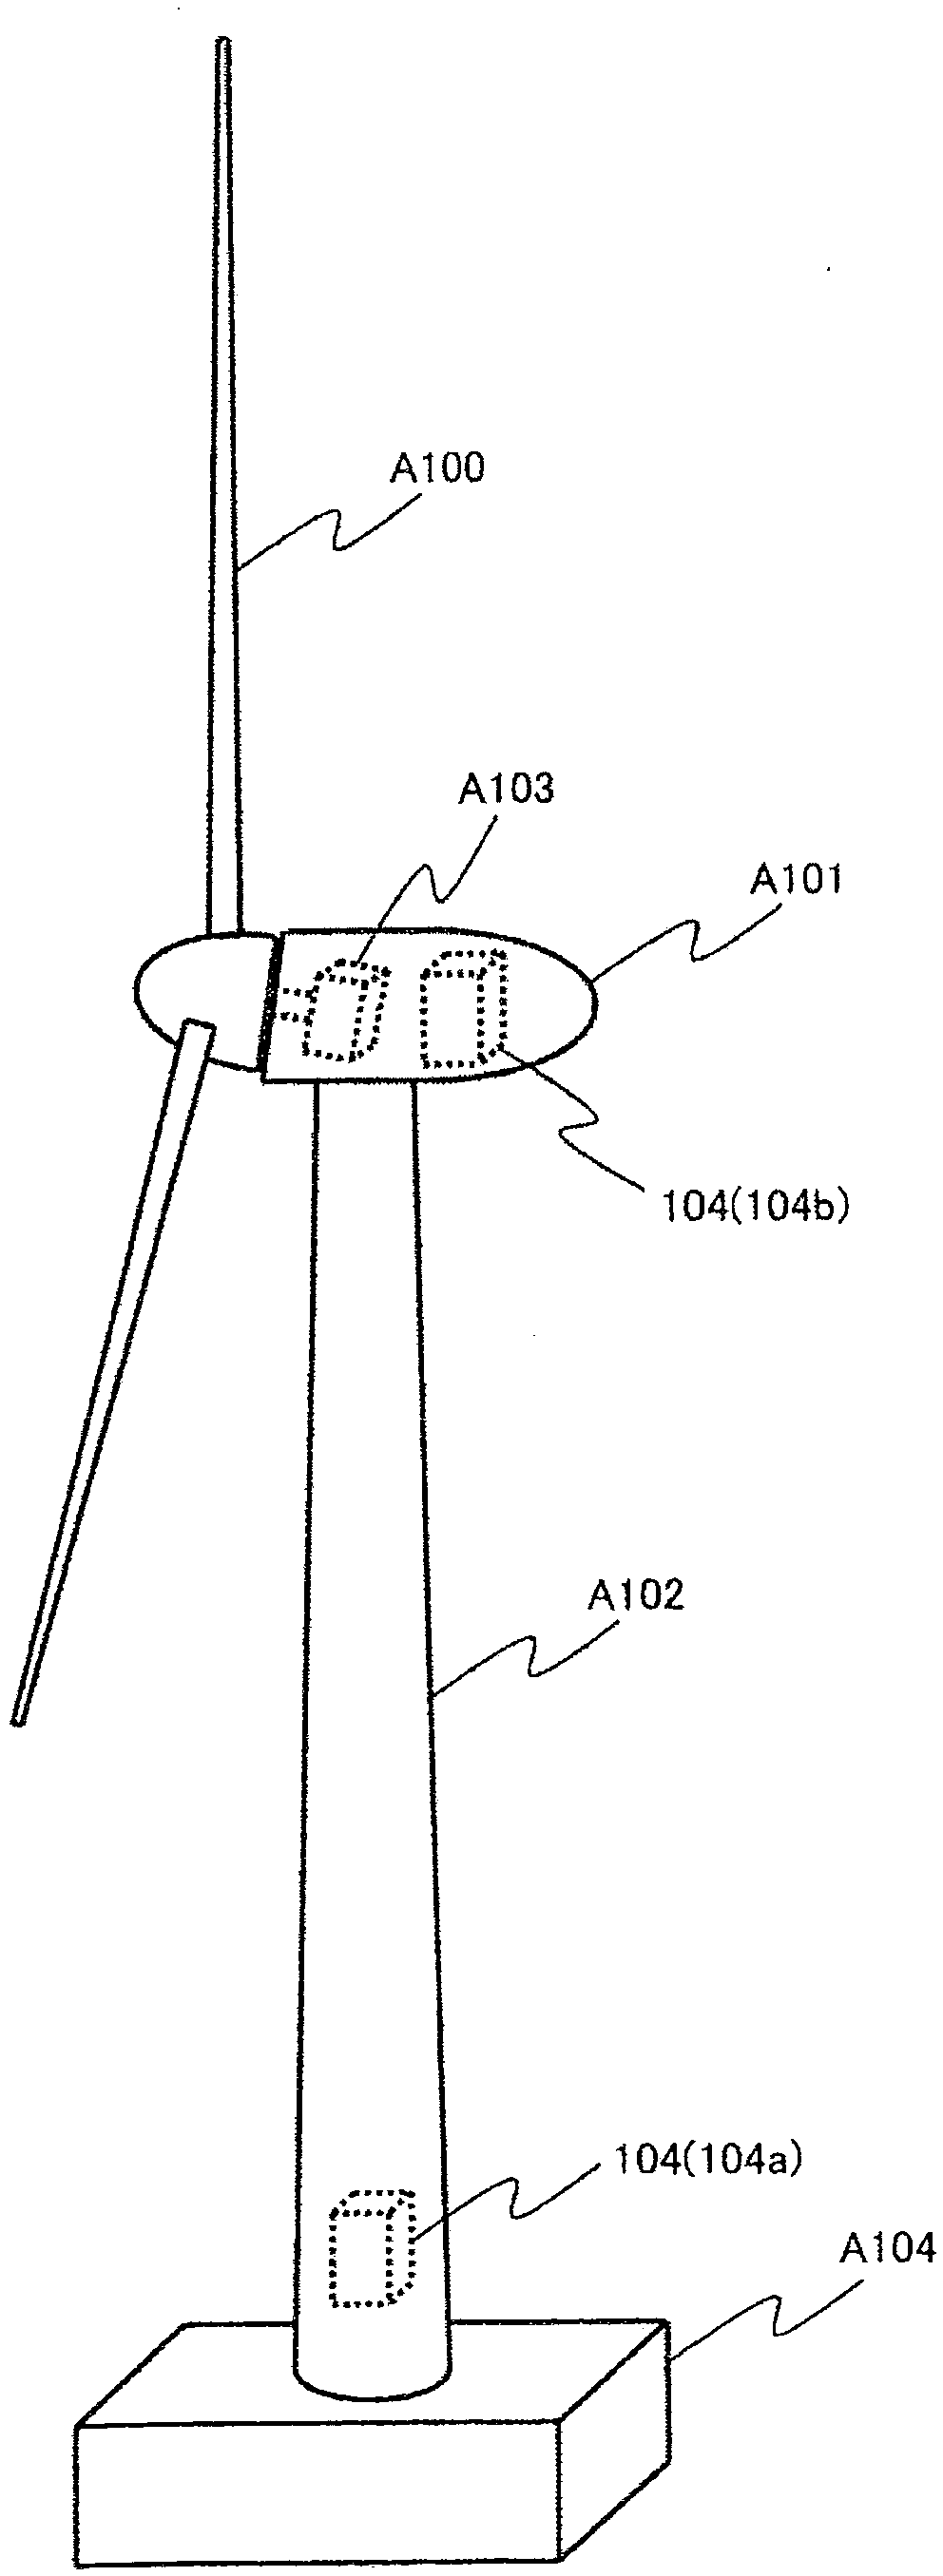 Power conversion device and wind power generation system